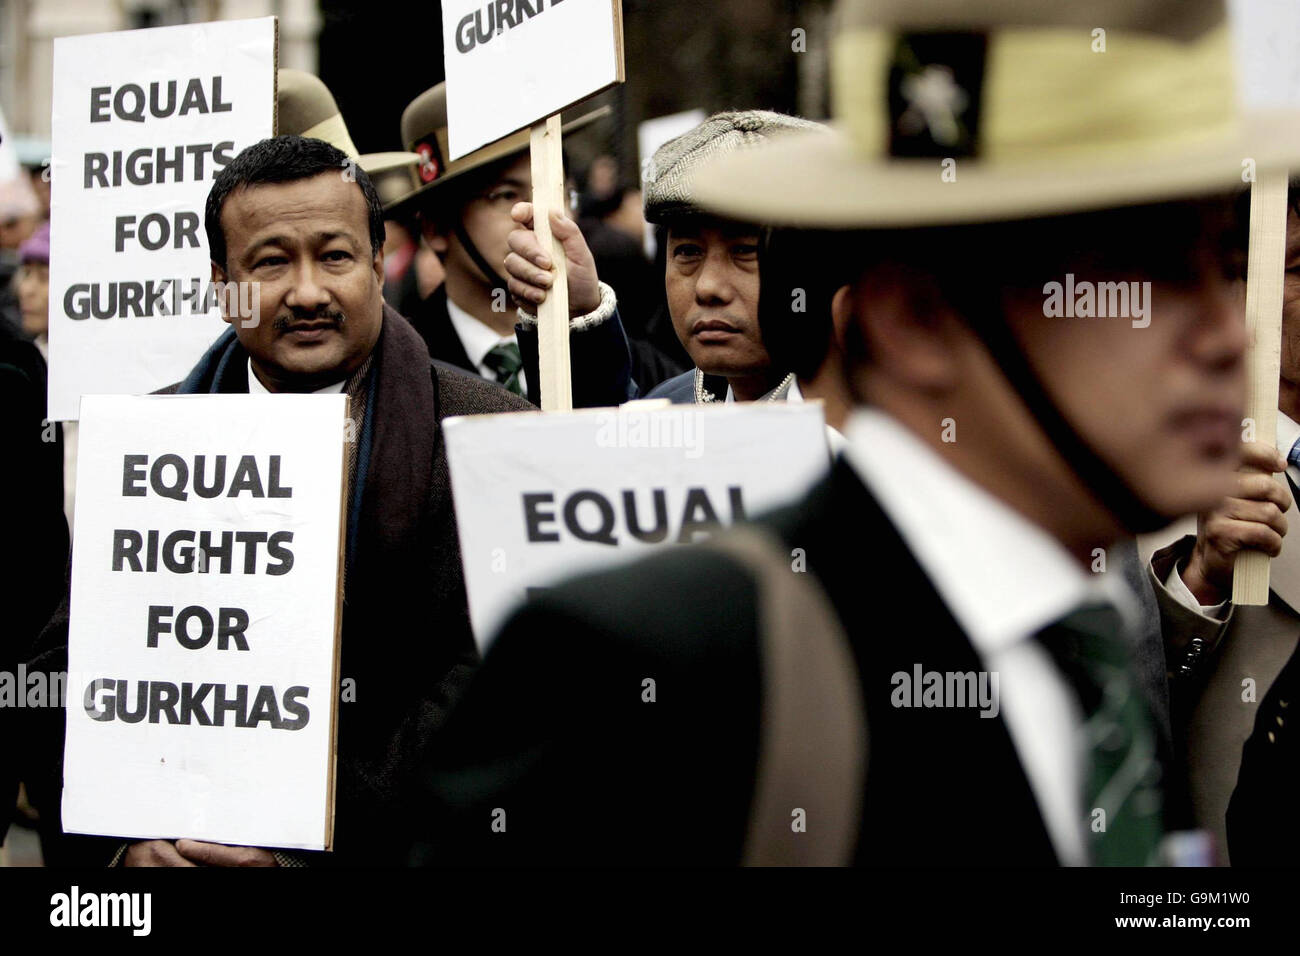 Gurkhas gather outside the House of Commons on their way to Downing Street, London, where they will demand equal rights. Stock Photo